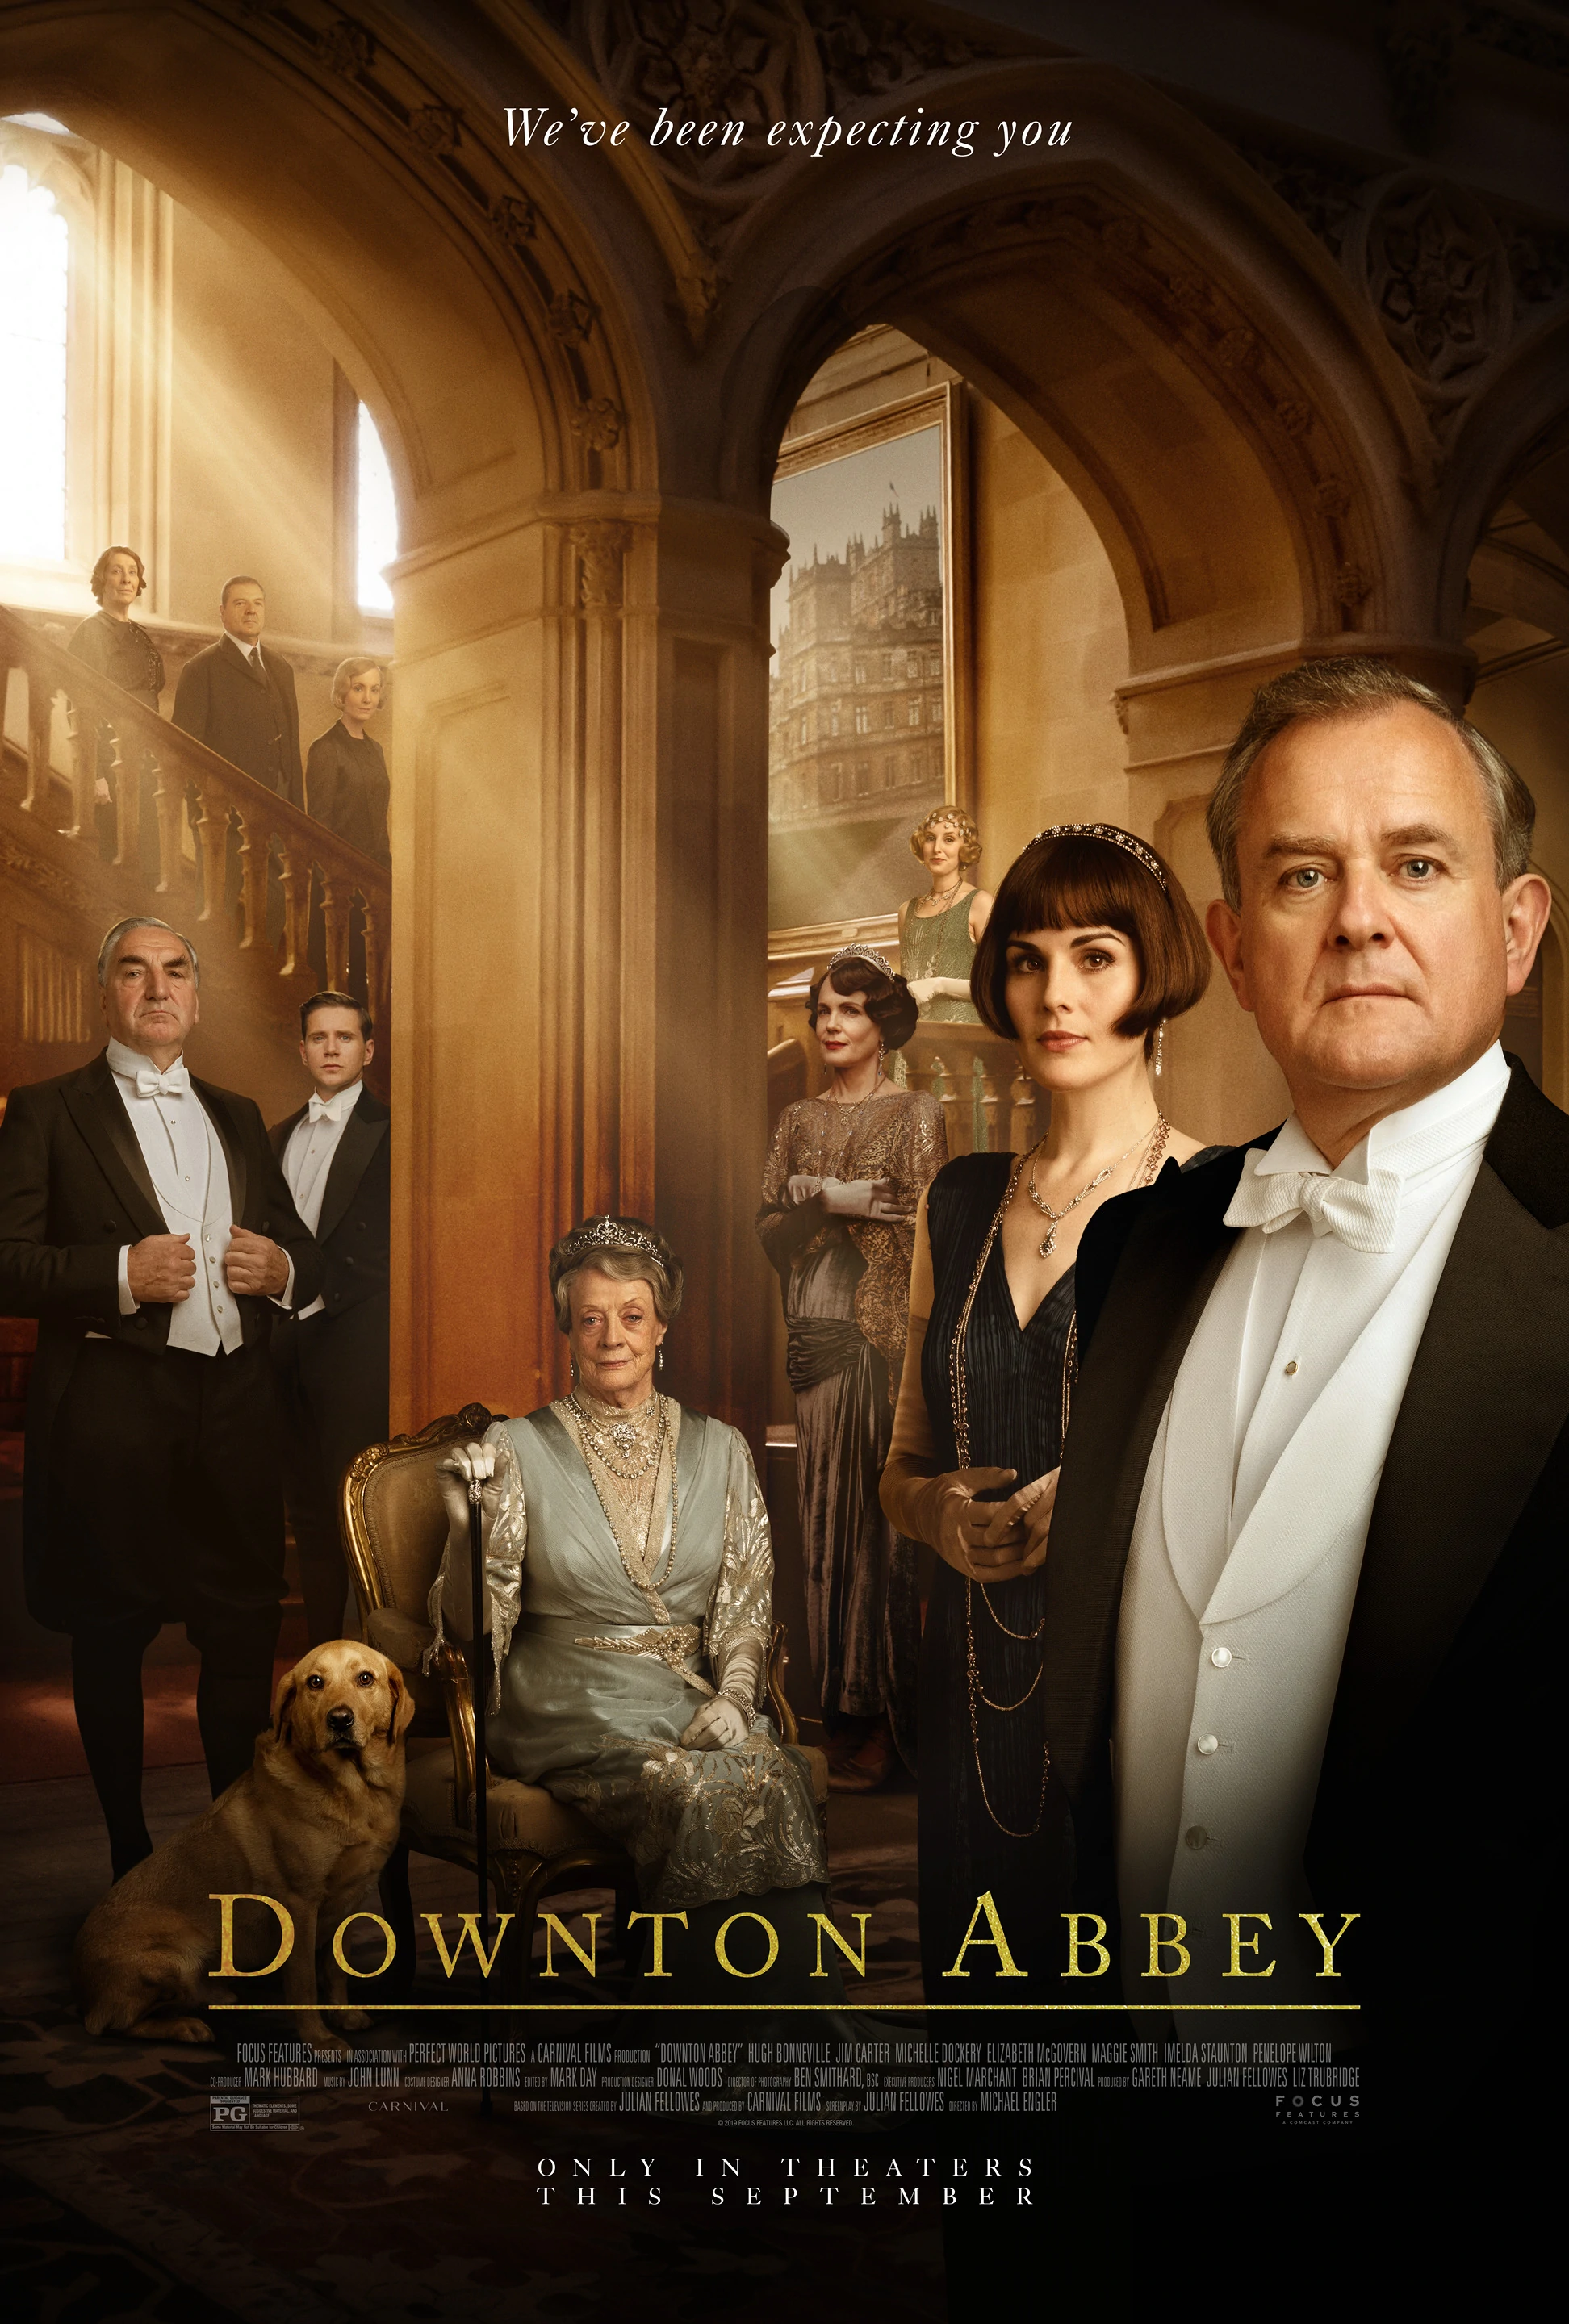 Review: Downton Abbey returns for a royal visit